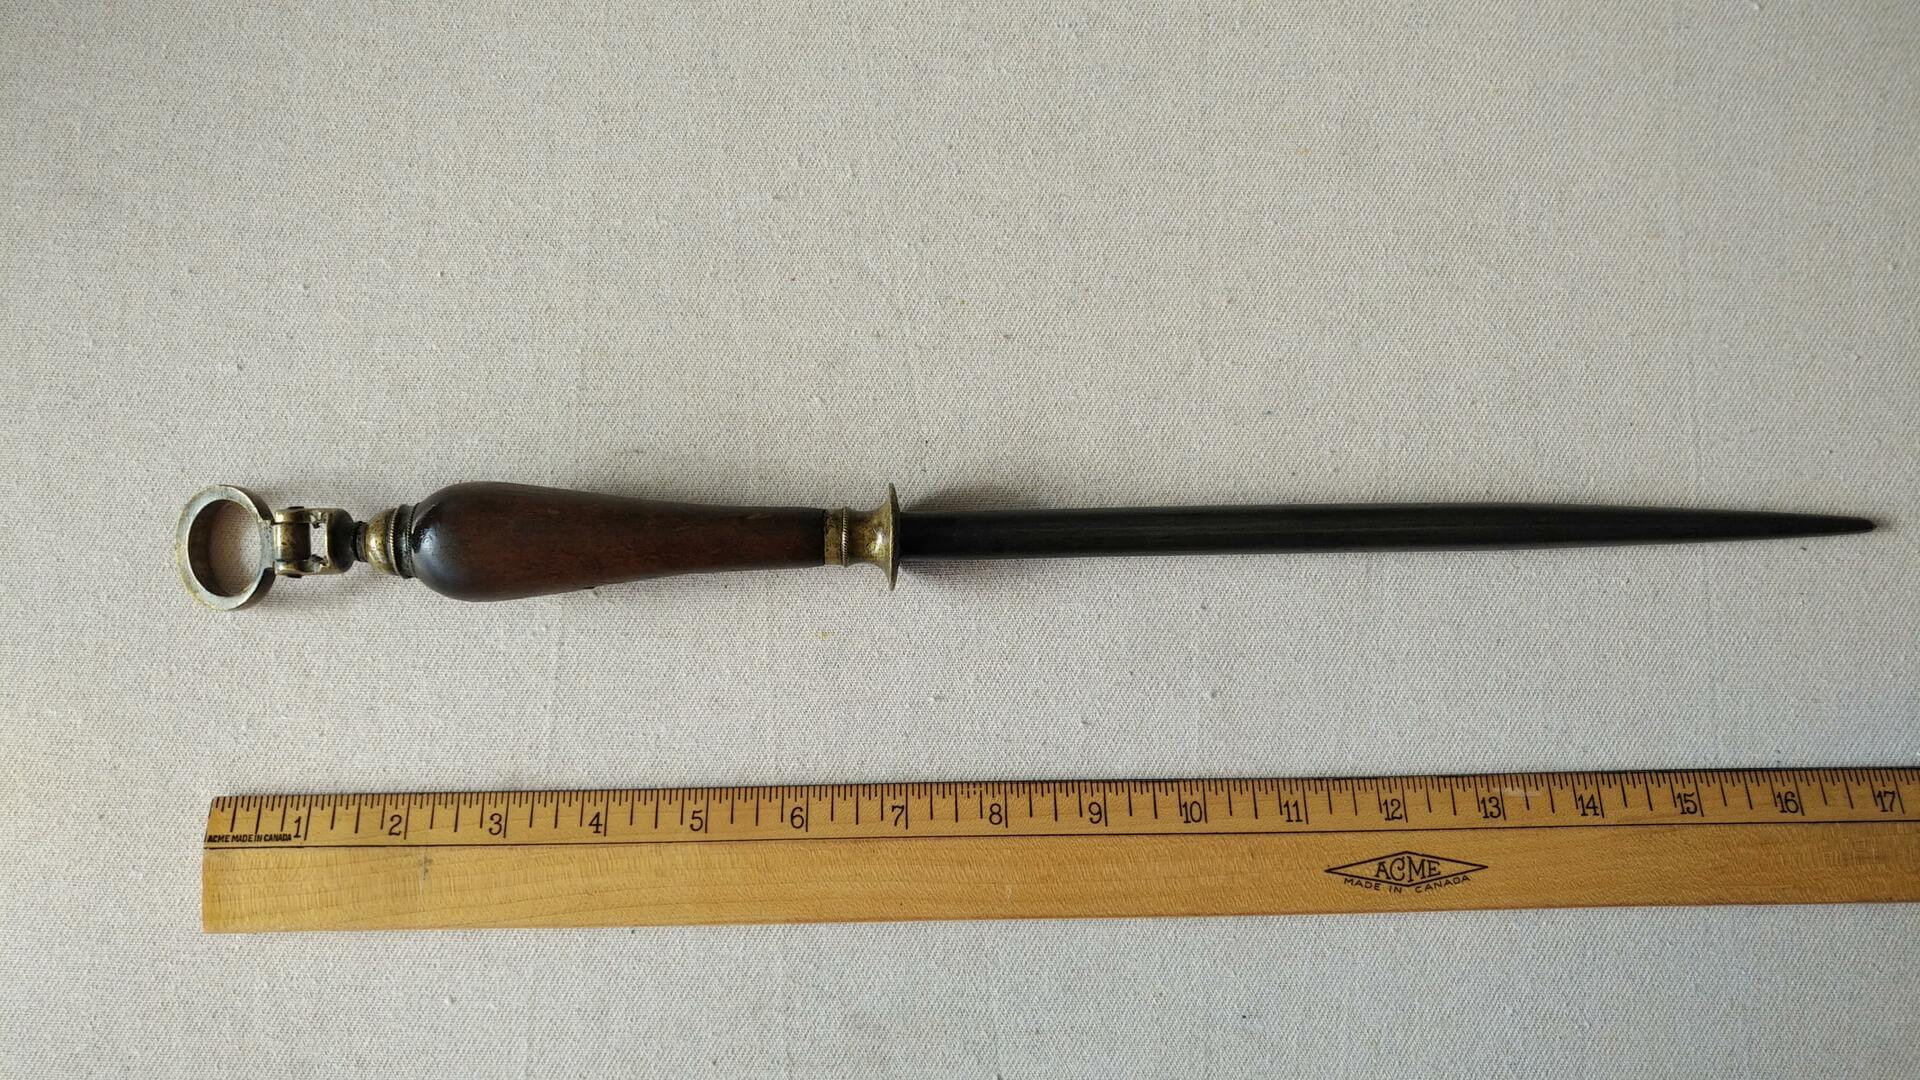 Rare beautiful vintage J. Askham & Son honing rod sharpener. Antique 19th century made in Sheffield England collectible chef and kitchen sharpening tools